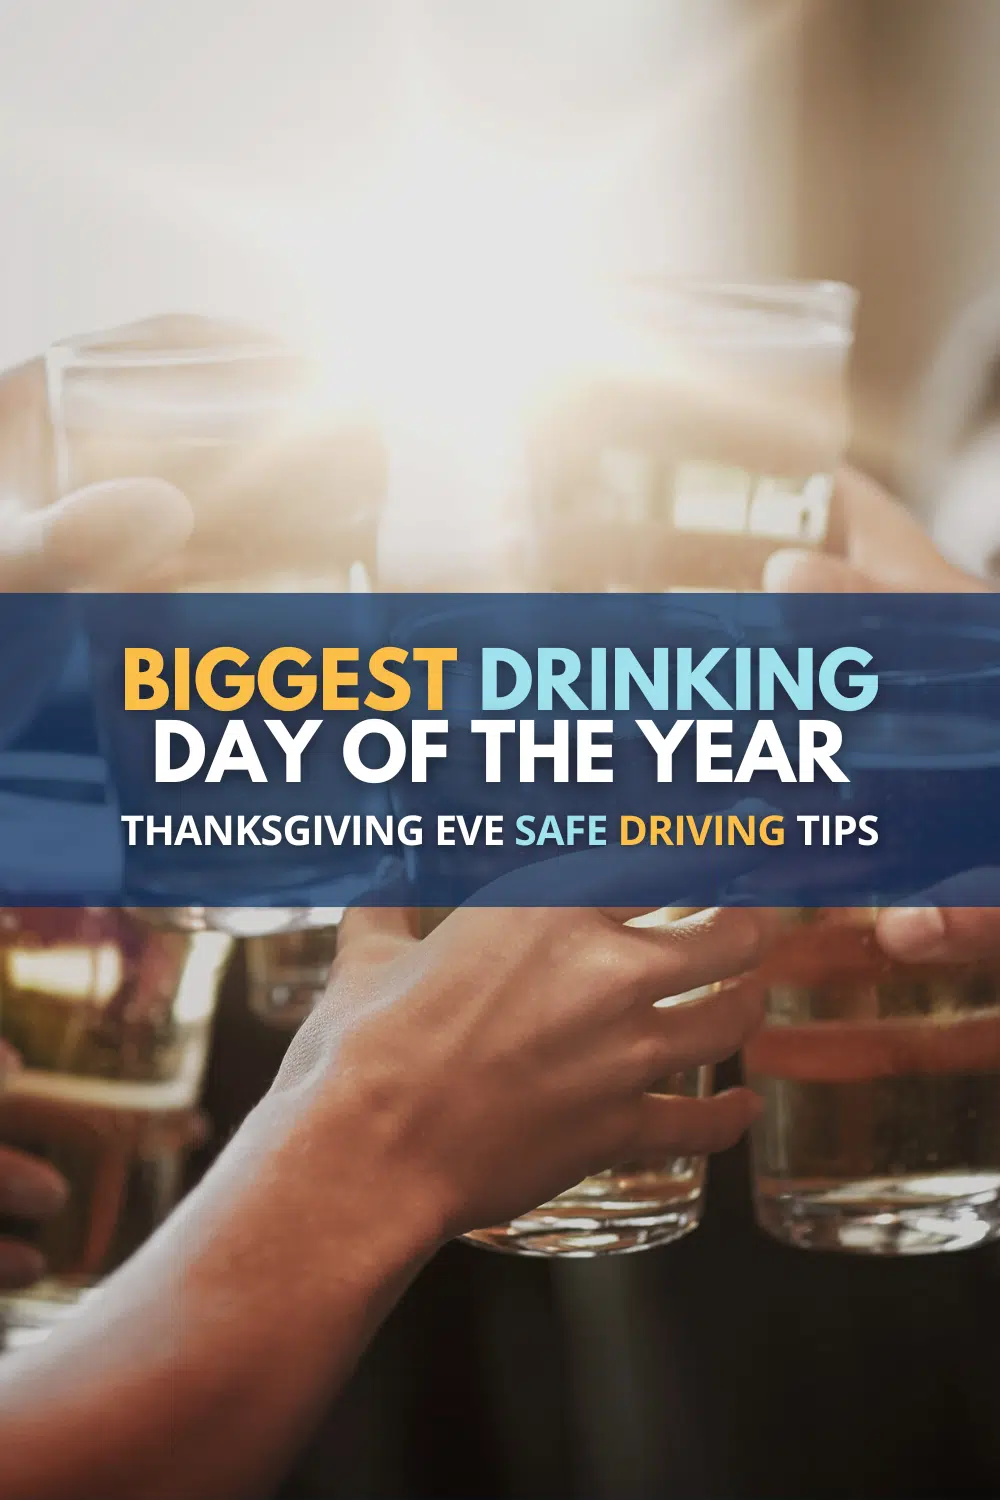 Thanksgiving Eve: Biggest Drinking Day of the Year Safe Driving Tips